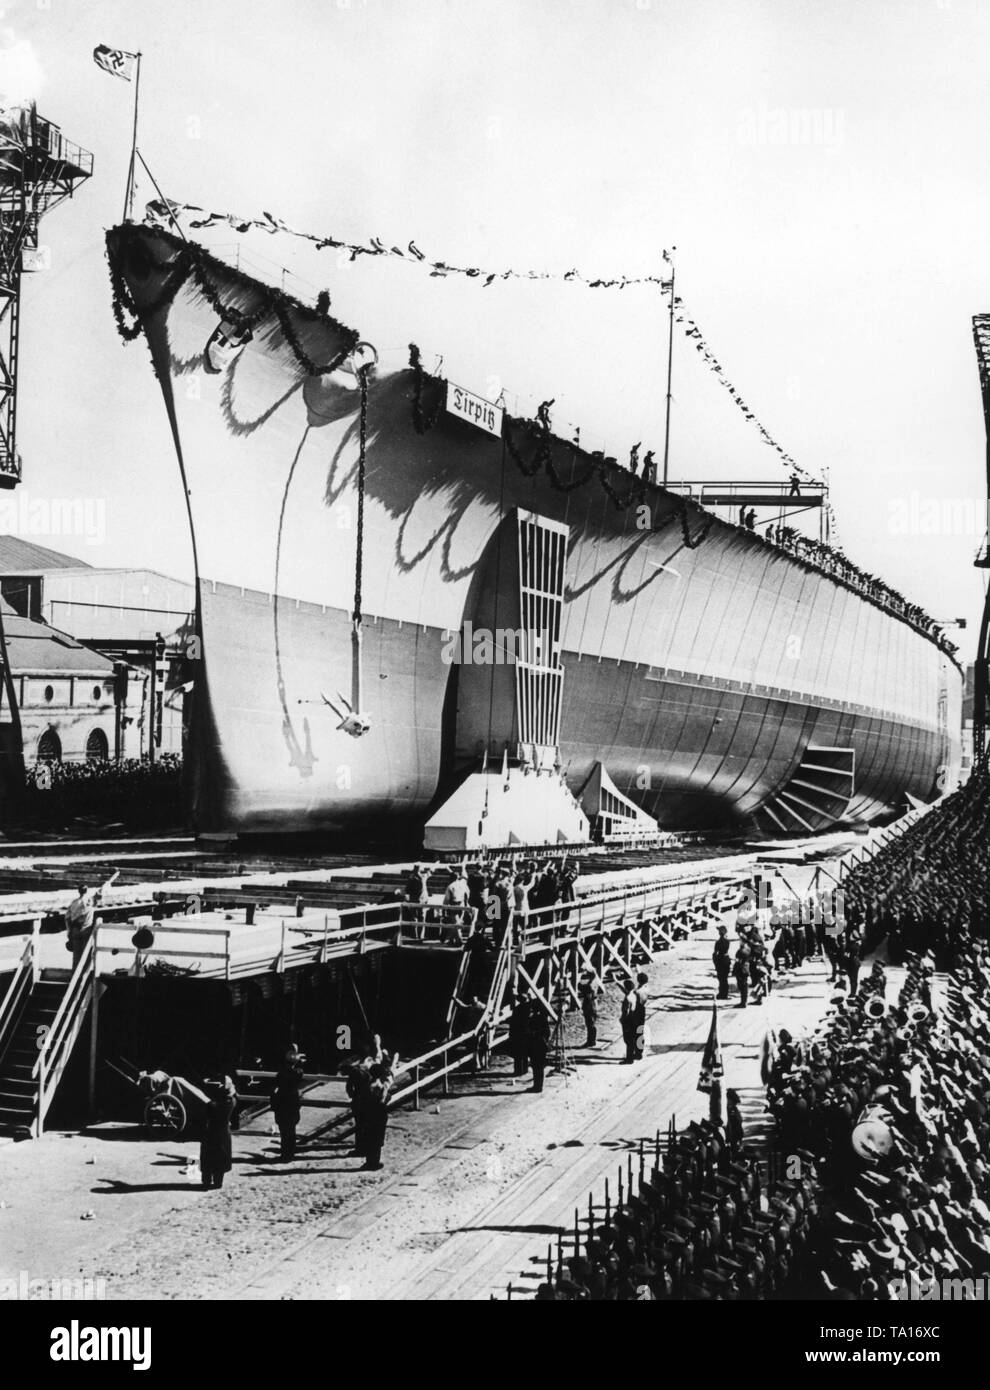 The picture shows the celebrations on the occasion of the launching of the 'Tirpitz', a battleship of the 'Bismarck class' of the Kriegsmarine. Soldiers, party members, civilians and workers have all appeared at the ceremony, which was also attended by Adolf Hitler. Stock Photo